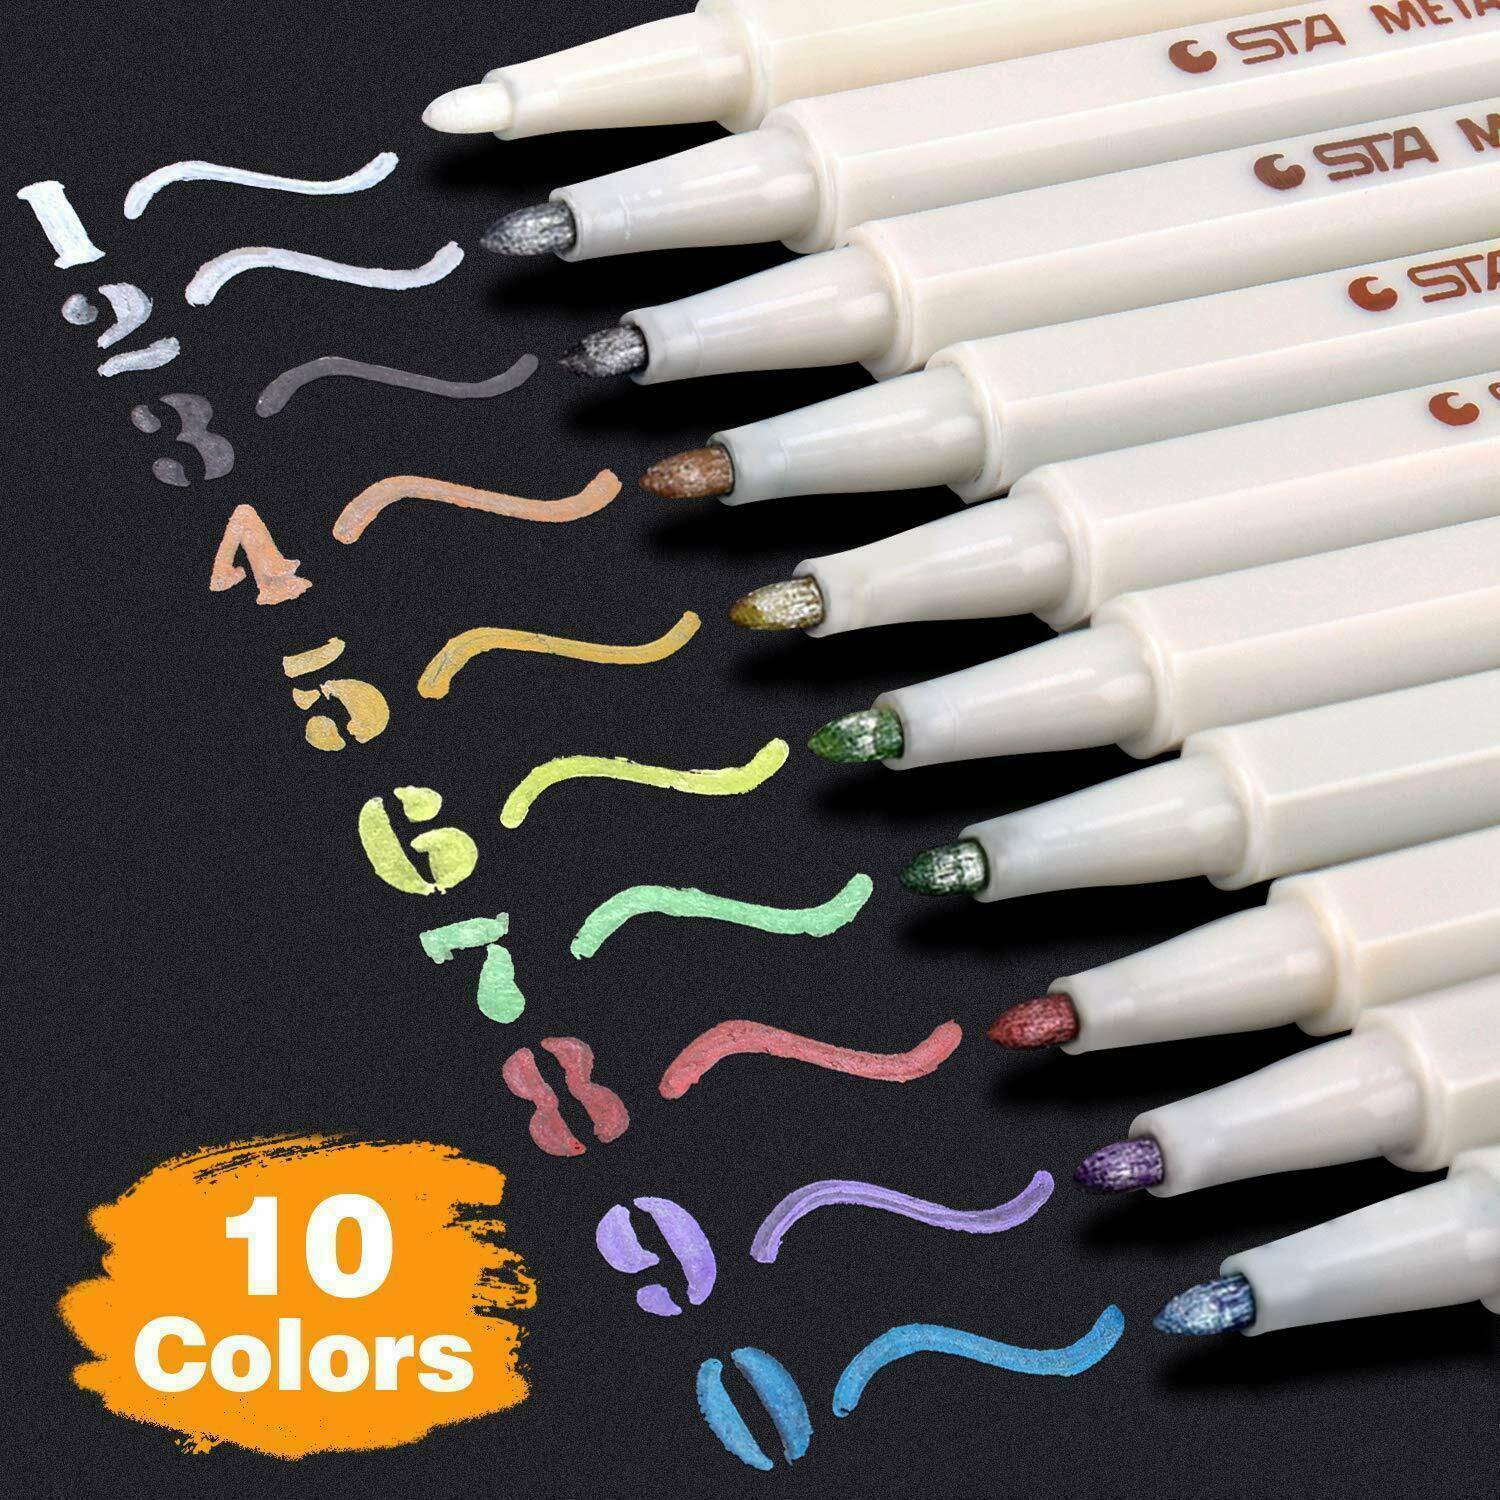 10x Assorted Metallic Paint Marker Pen Markers Sets of 10 Colors DIY Brush Kits